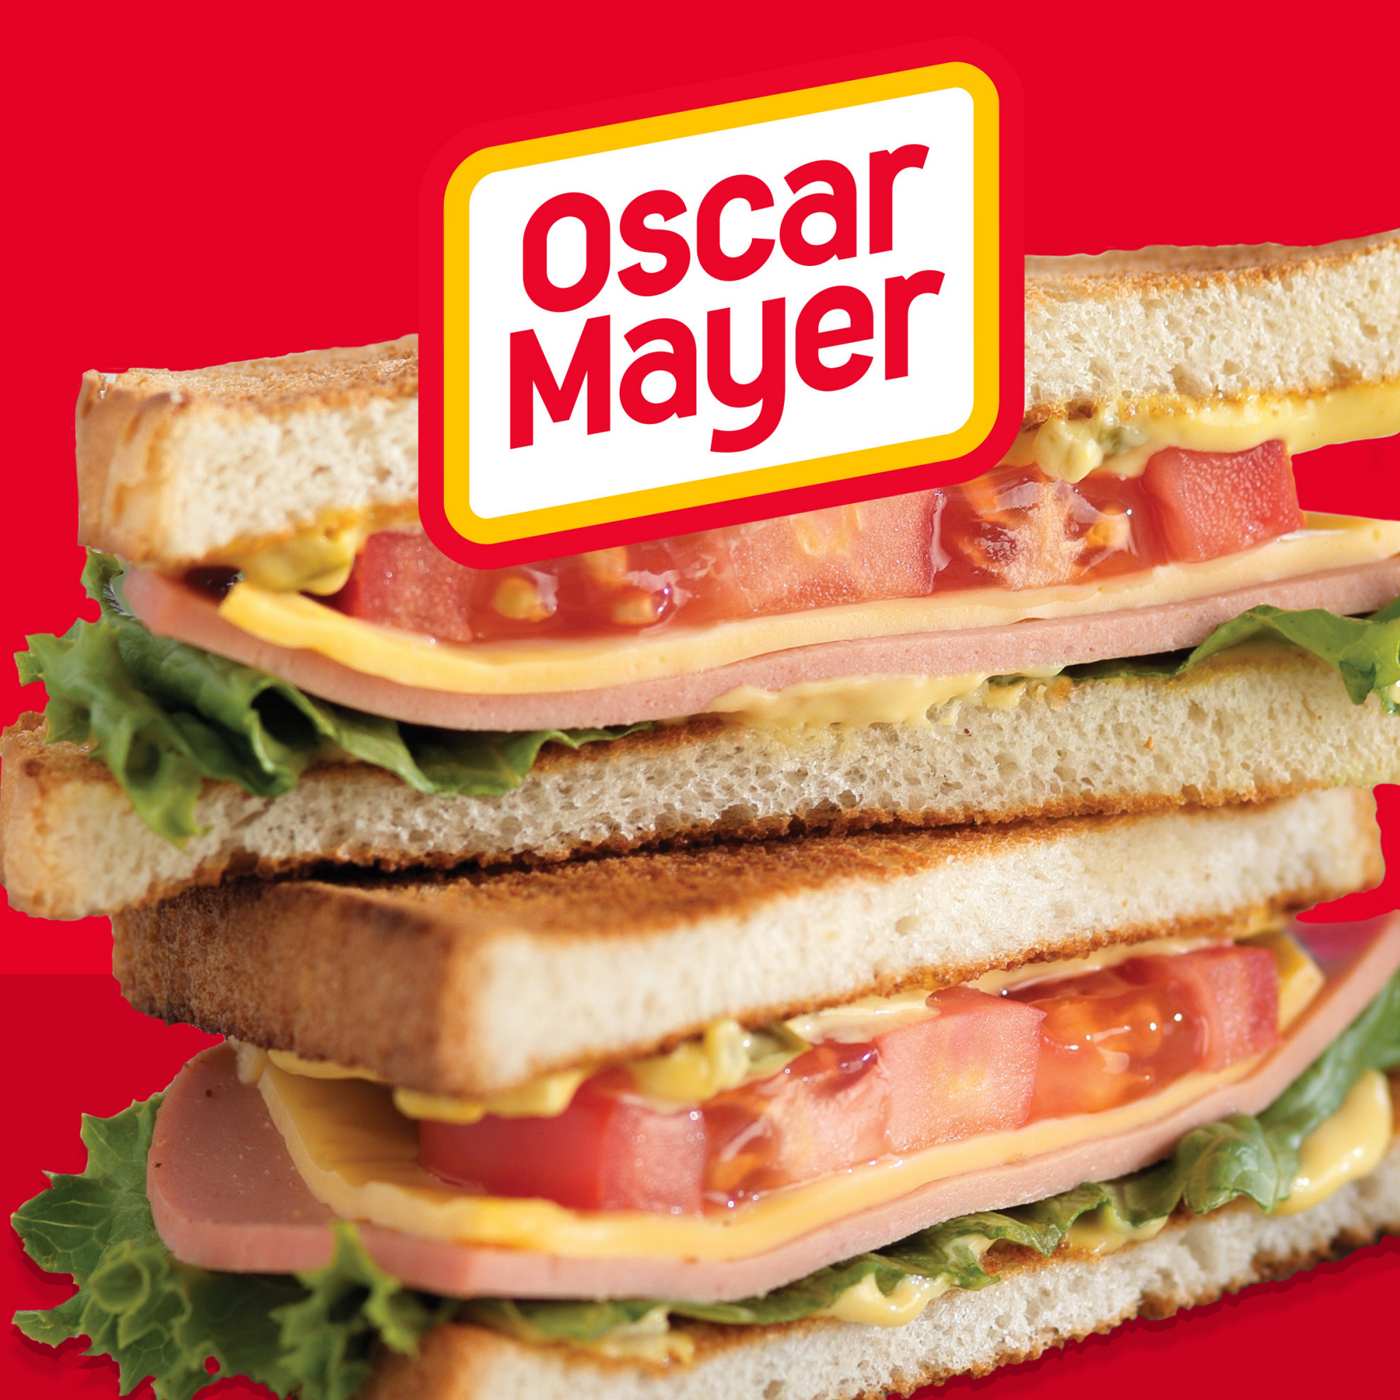 Oscar Mayer Bologna Sliced Lunch Meat, Thick Cut; image 3 of 6